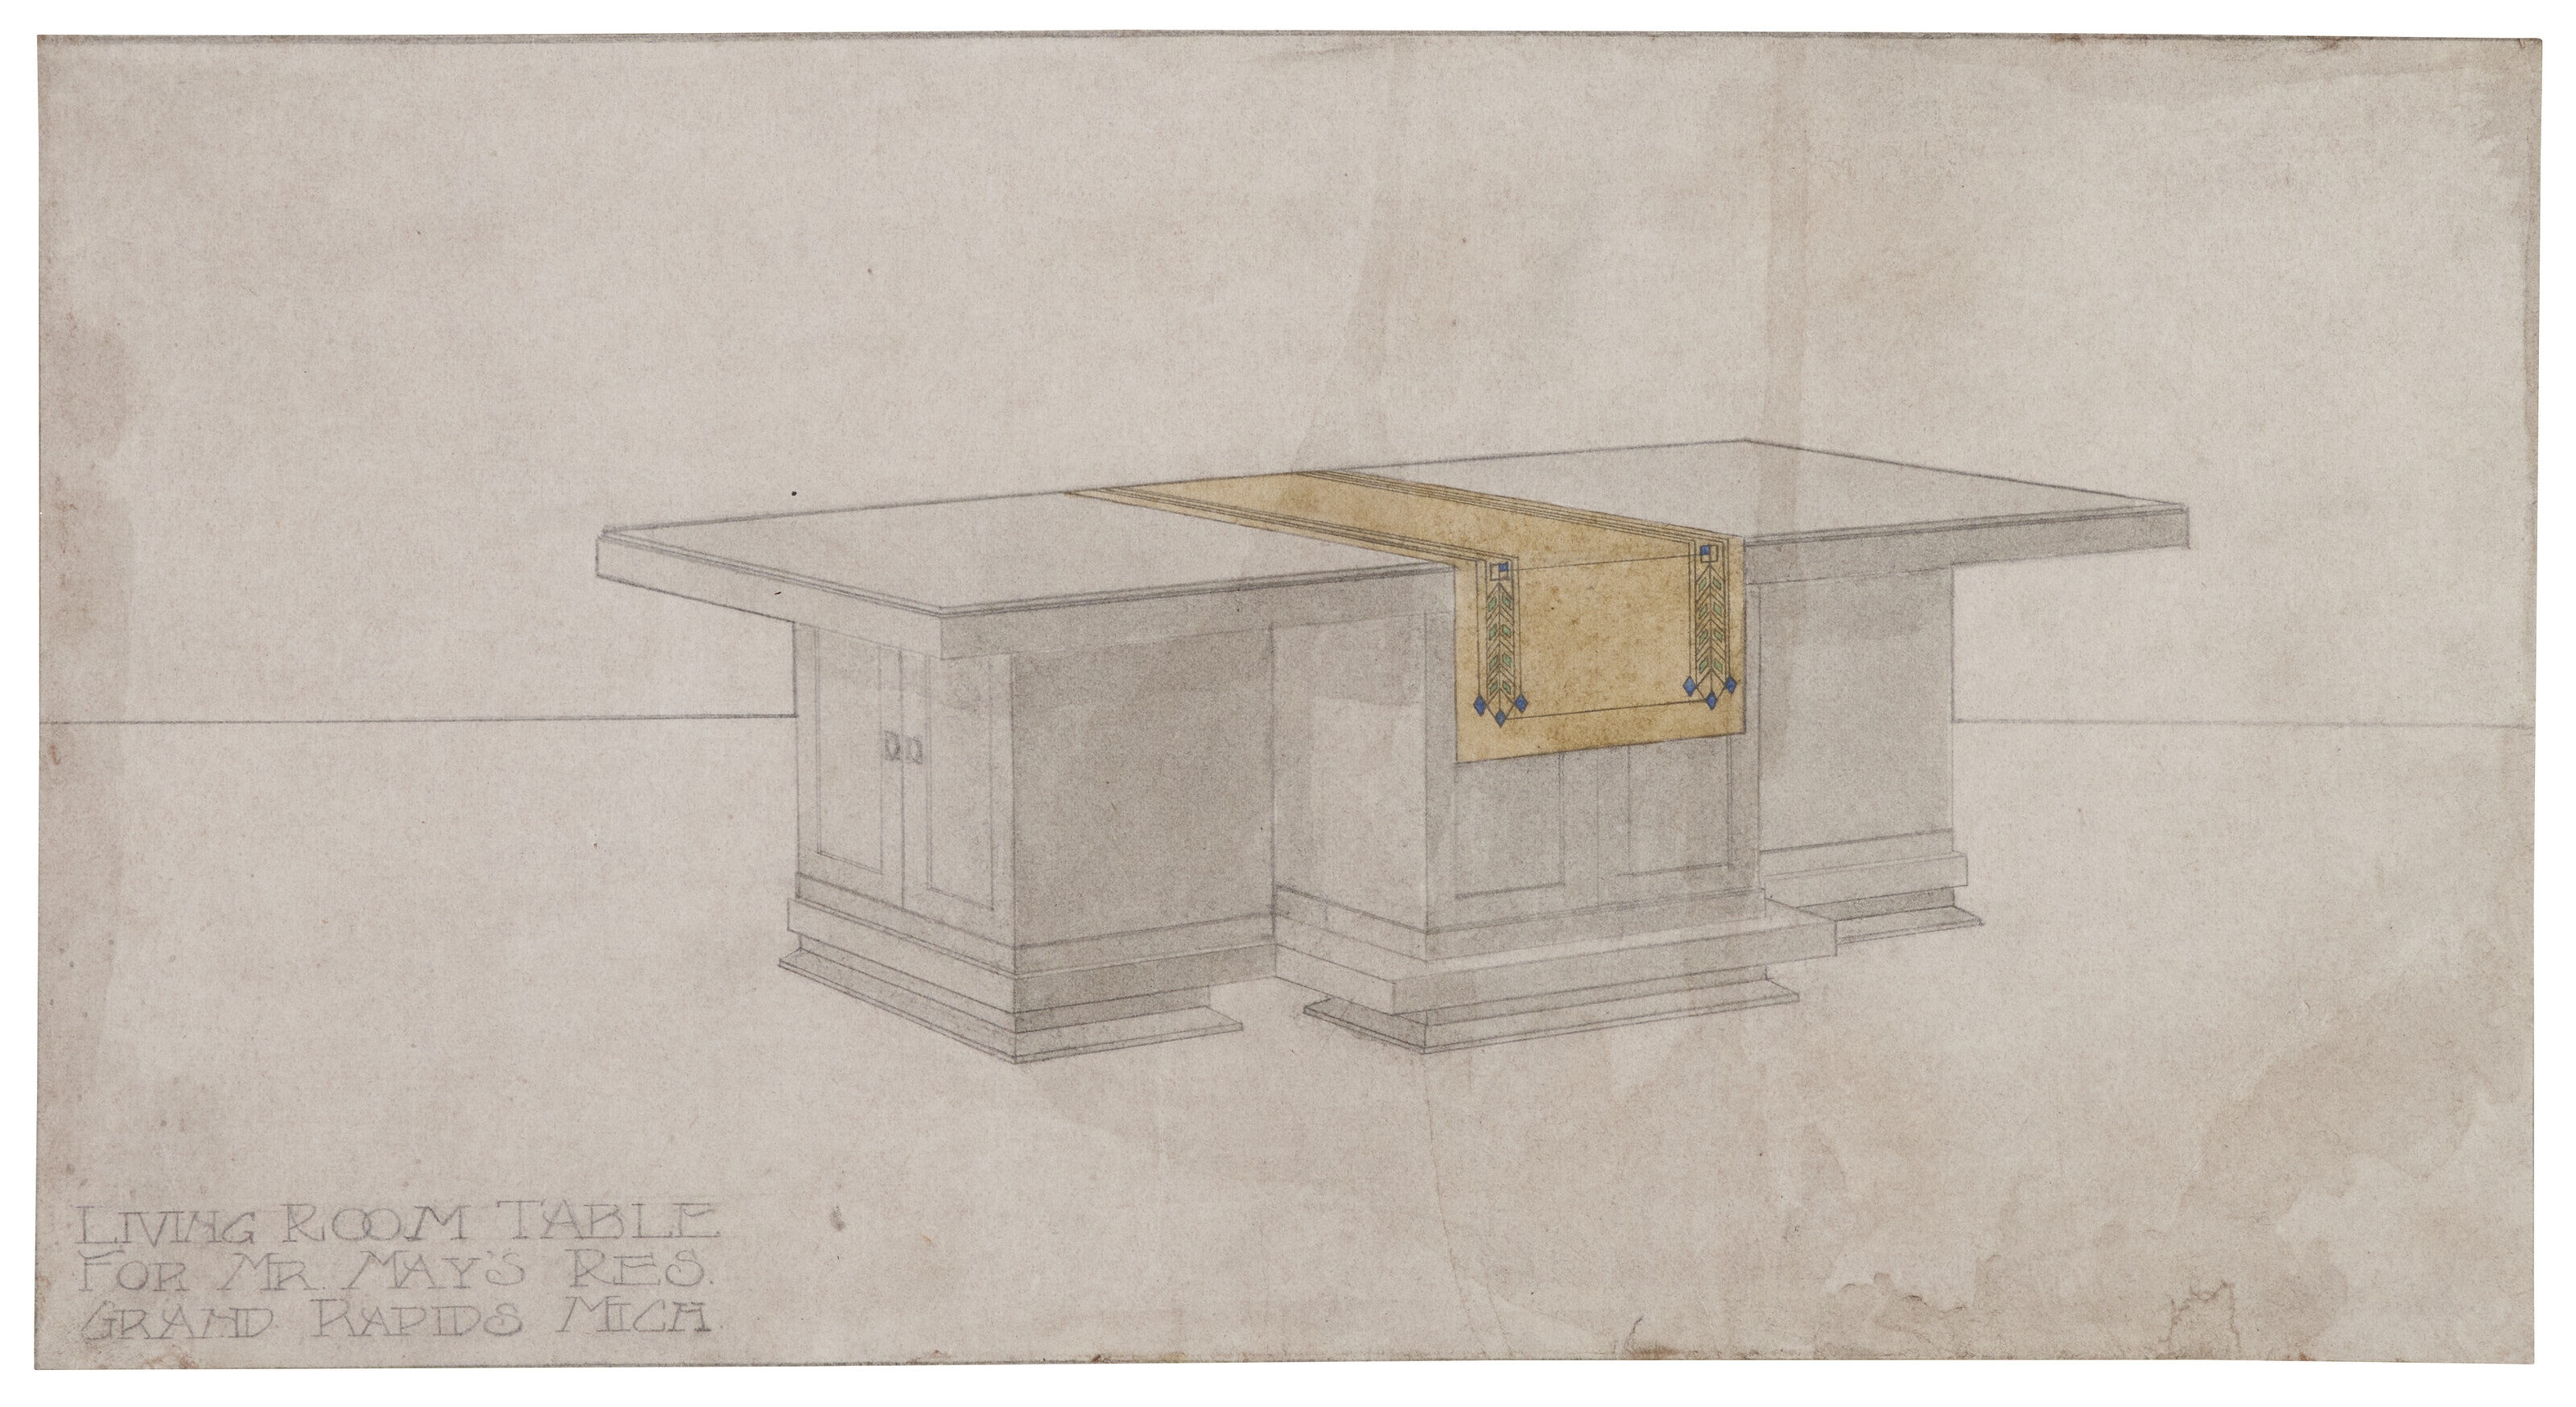 DRAWING OF THE LIVING ROOM TABLE FOR THE MEYER MAY HOUSE, GRAND RAPIDS, MICHIGAN